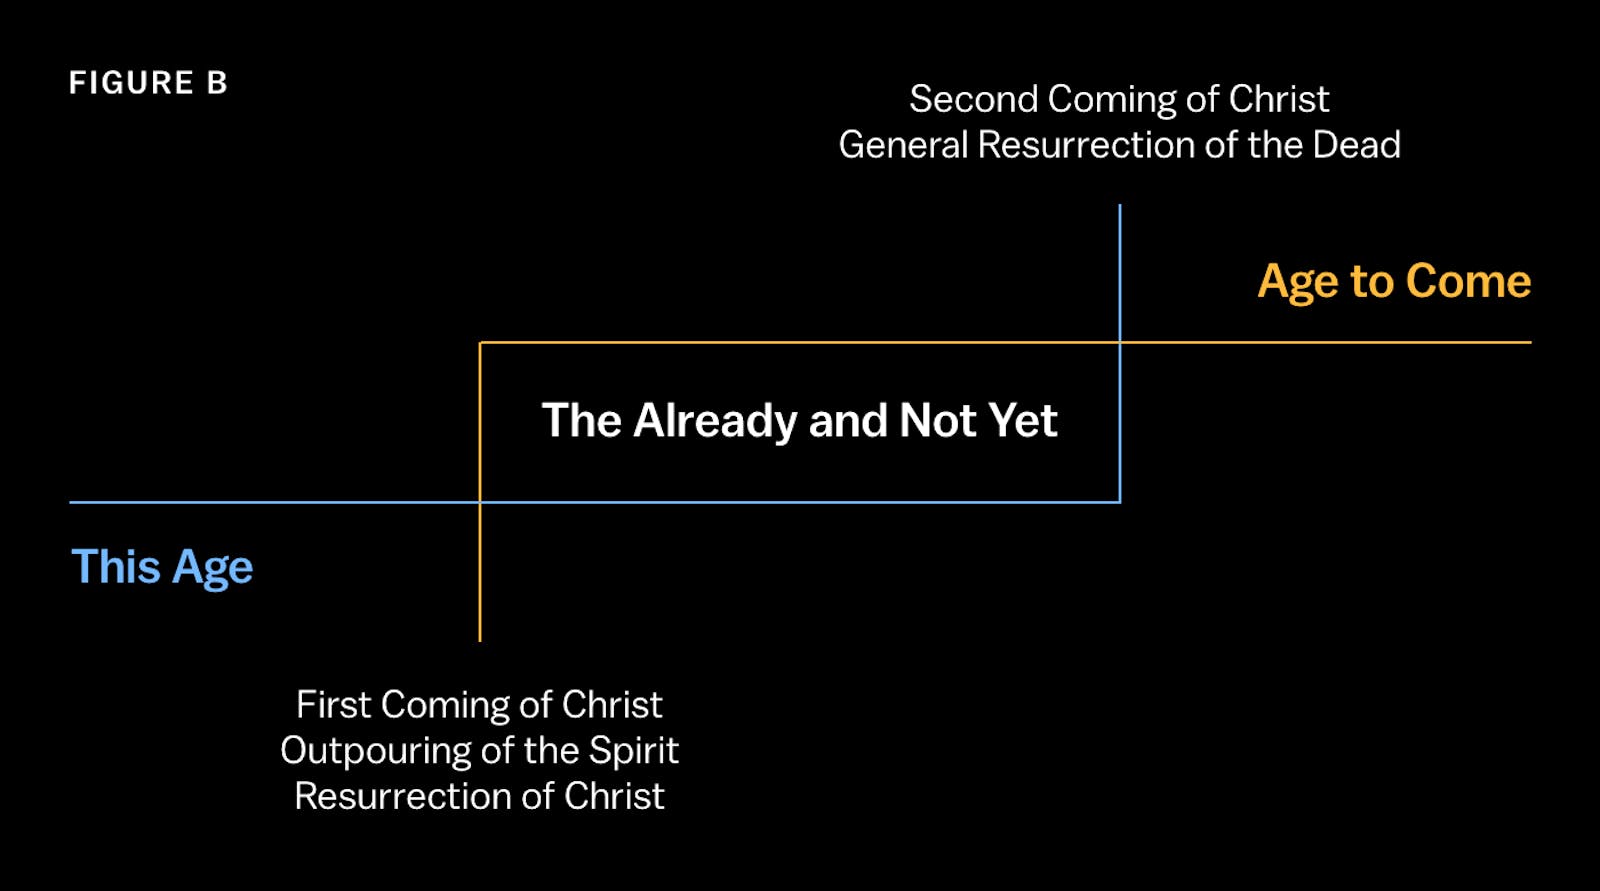 second coming of christ timeline